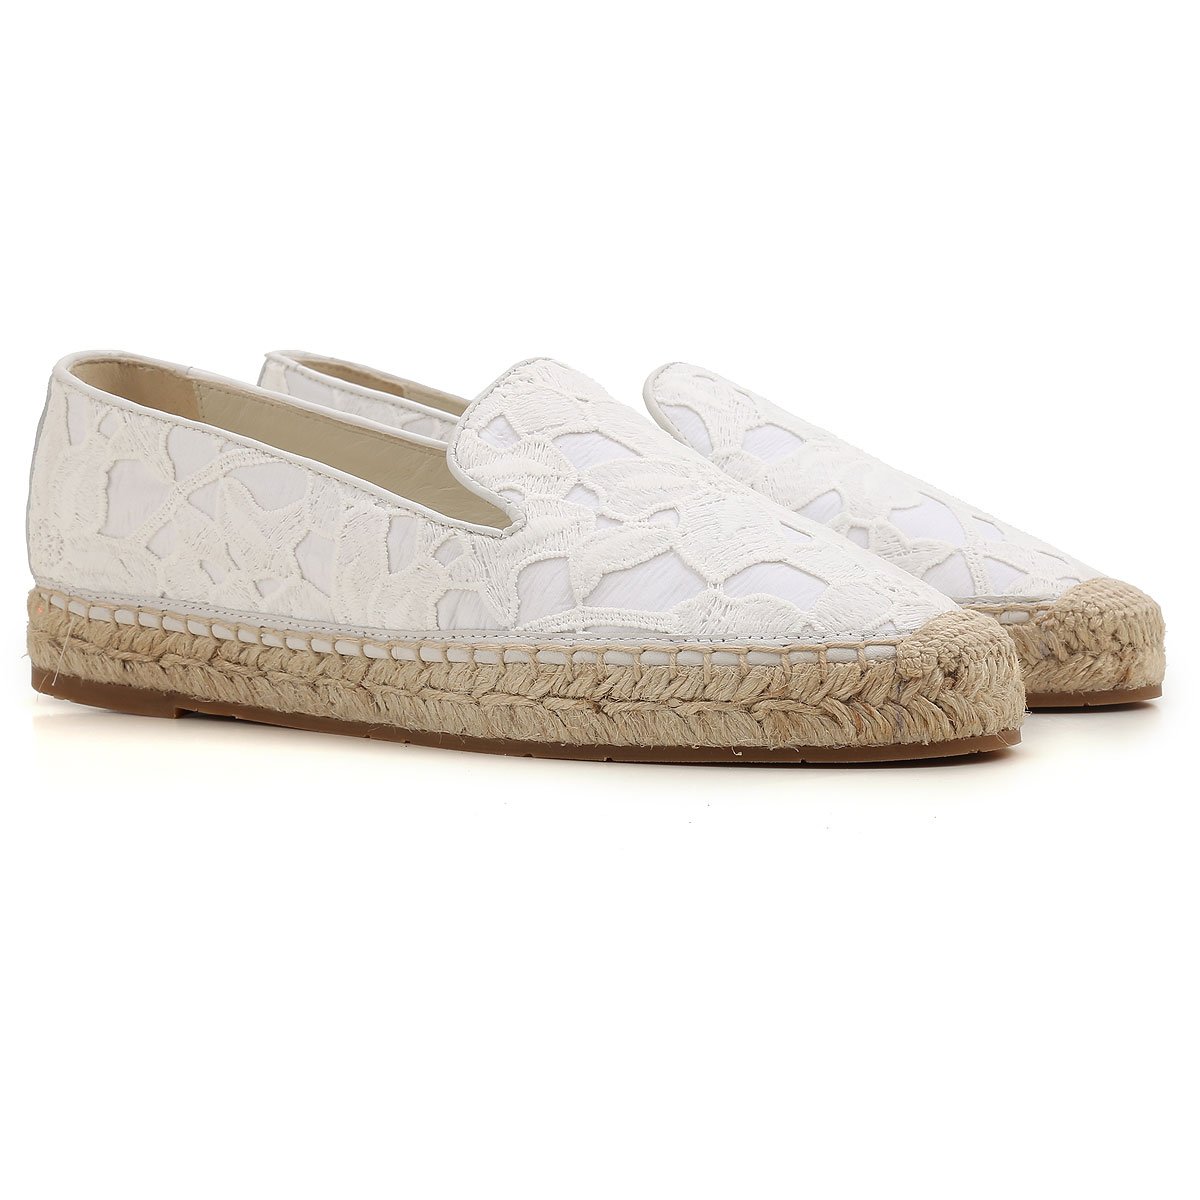 Womens Shoes Moncler, Style code: 20125-07804-034